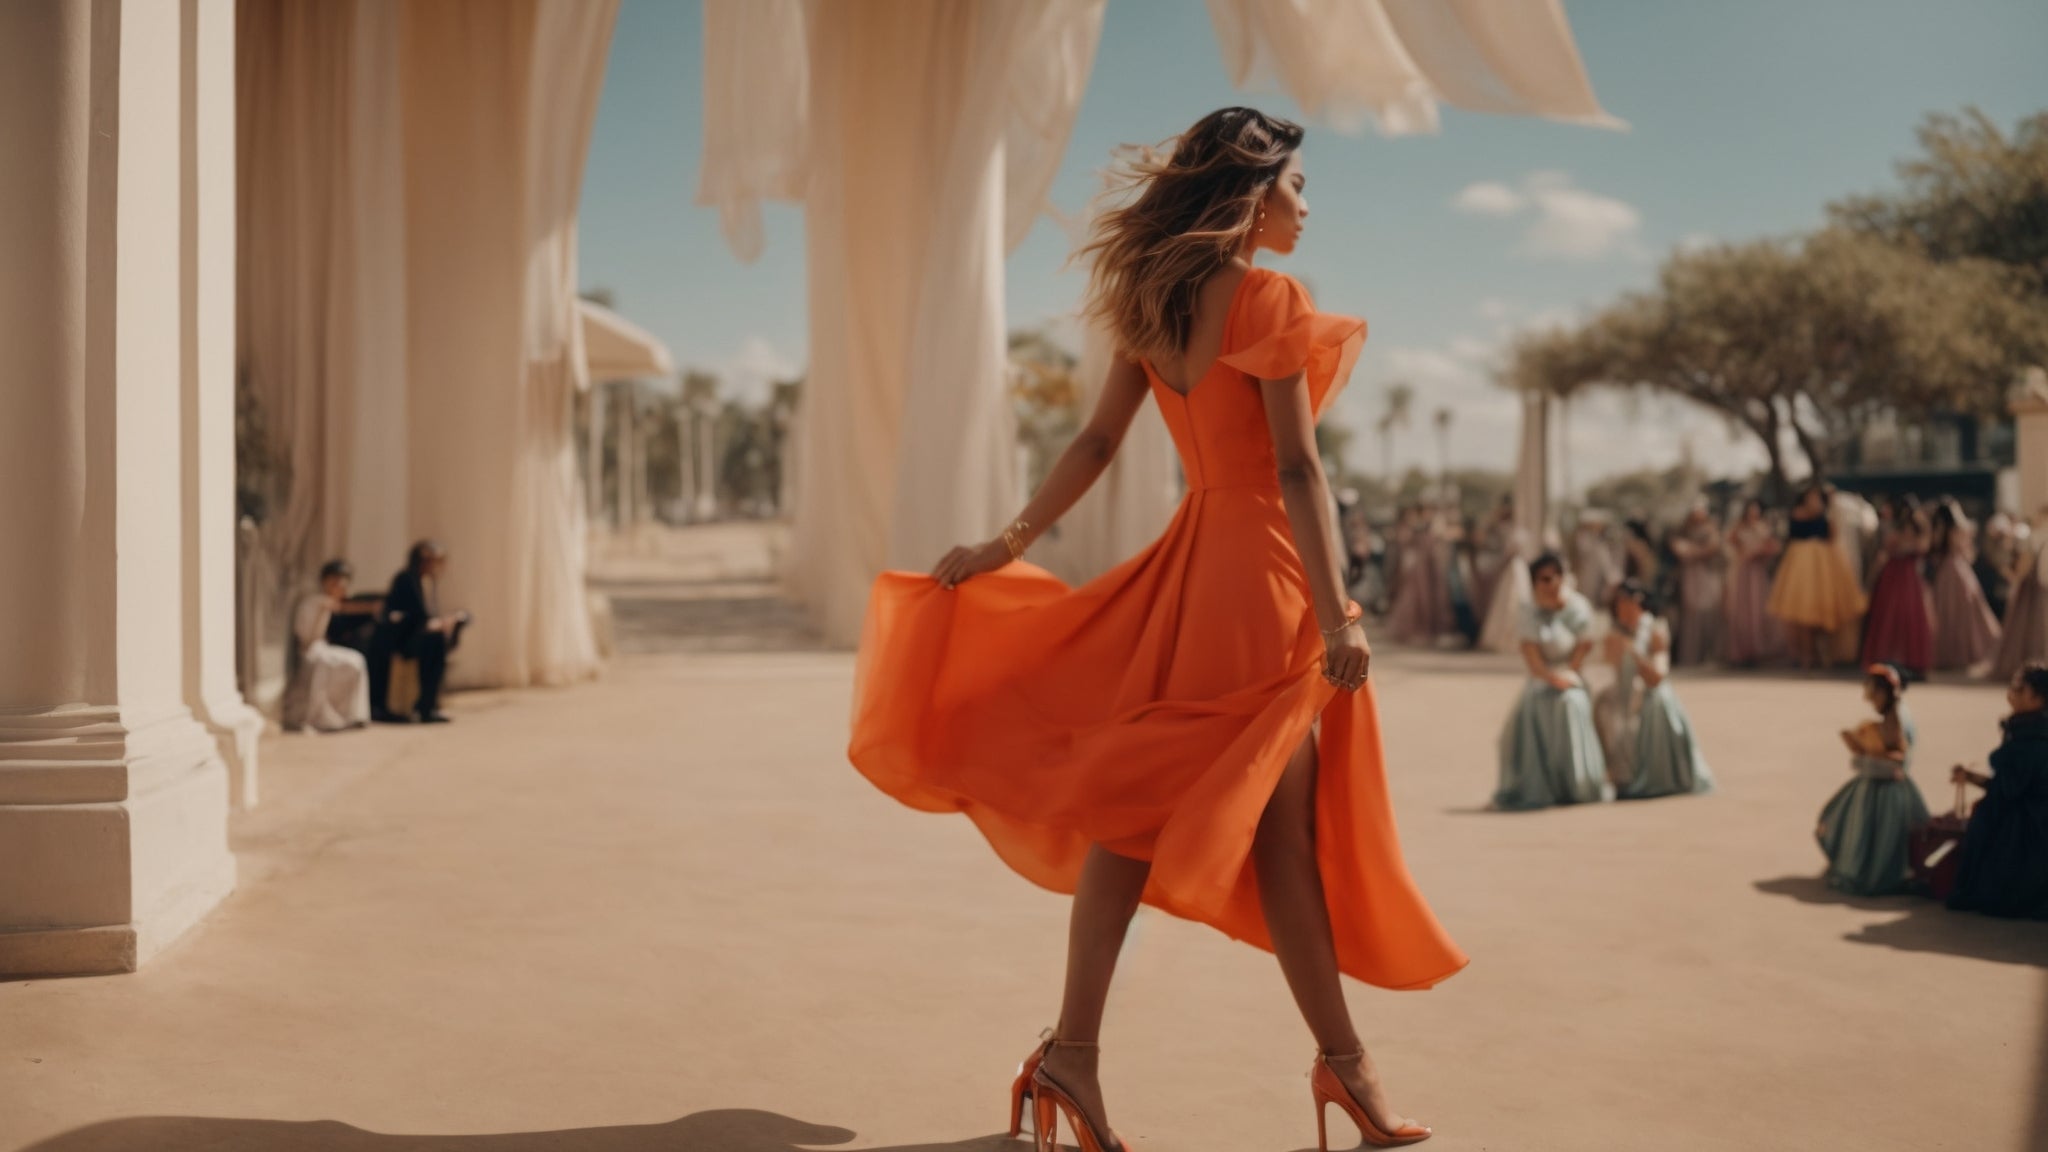 Women in orange dress with wind blowing the skirt on the dress